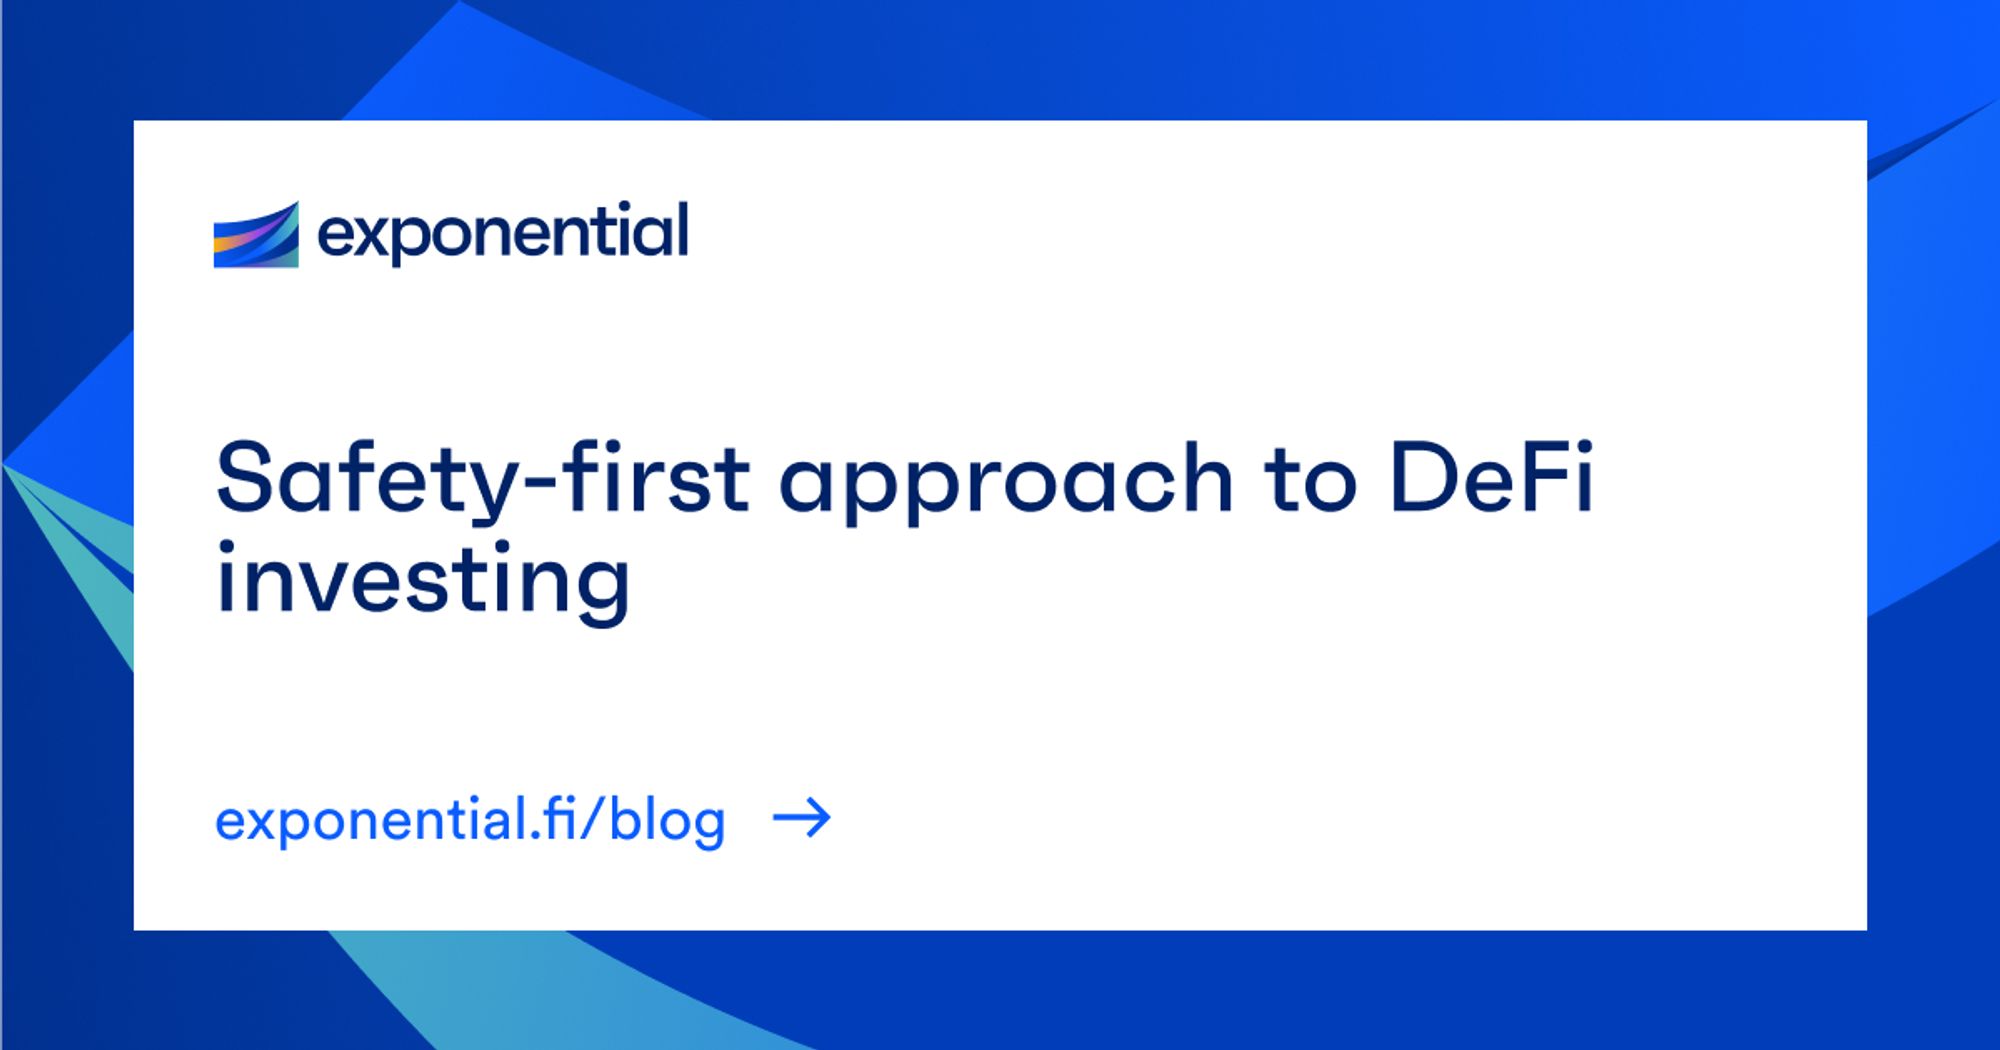 Exponential’s safety-first approach to DeFi investing blog cover image